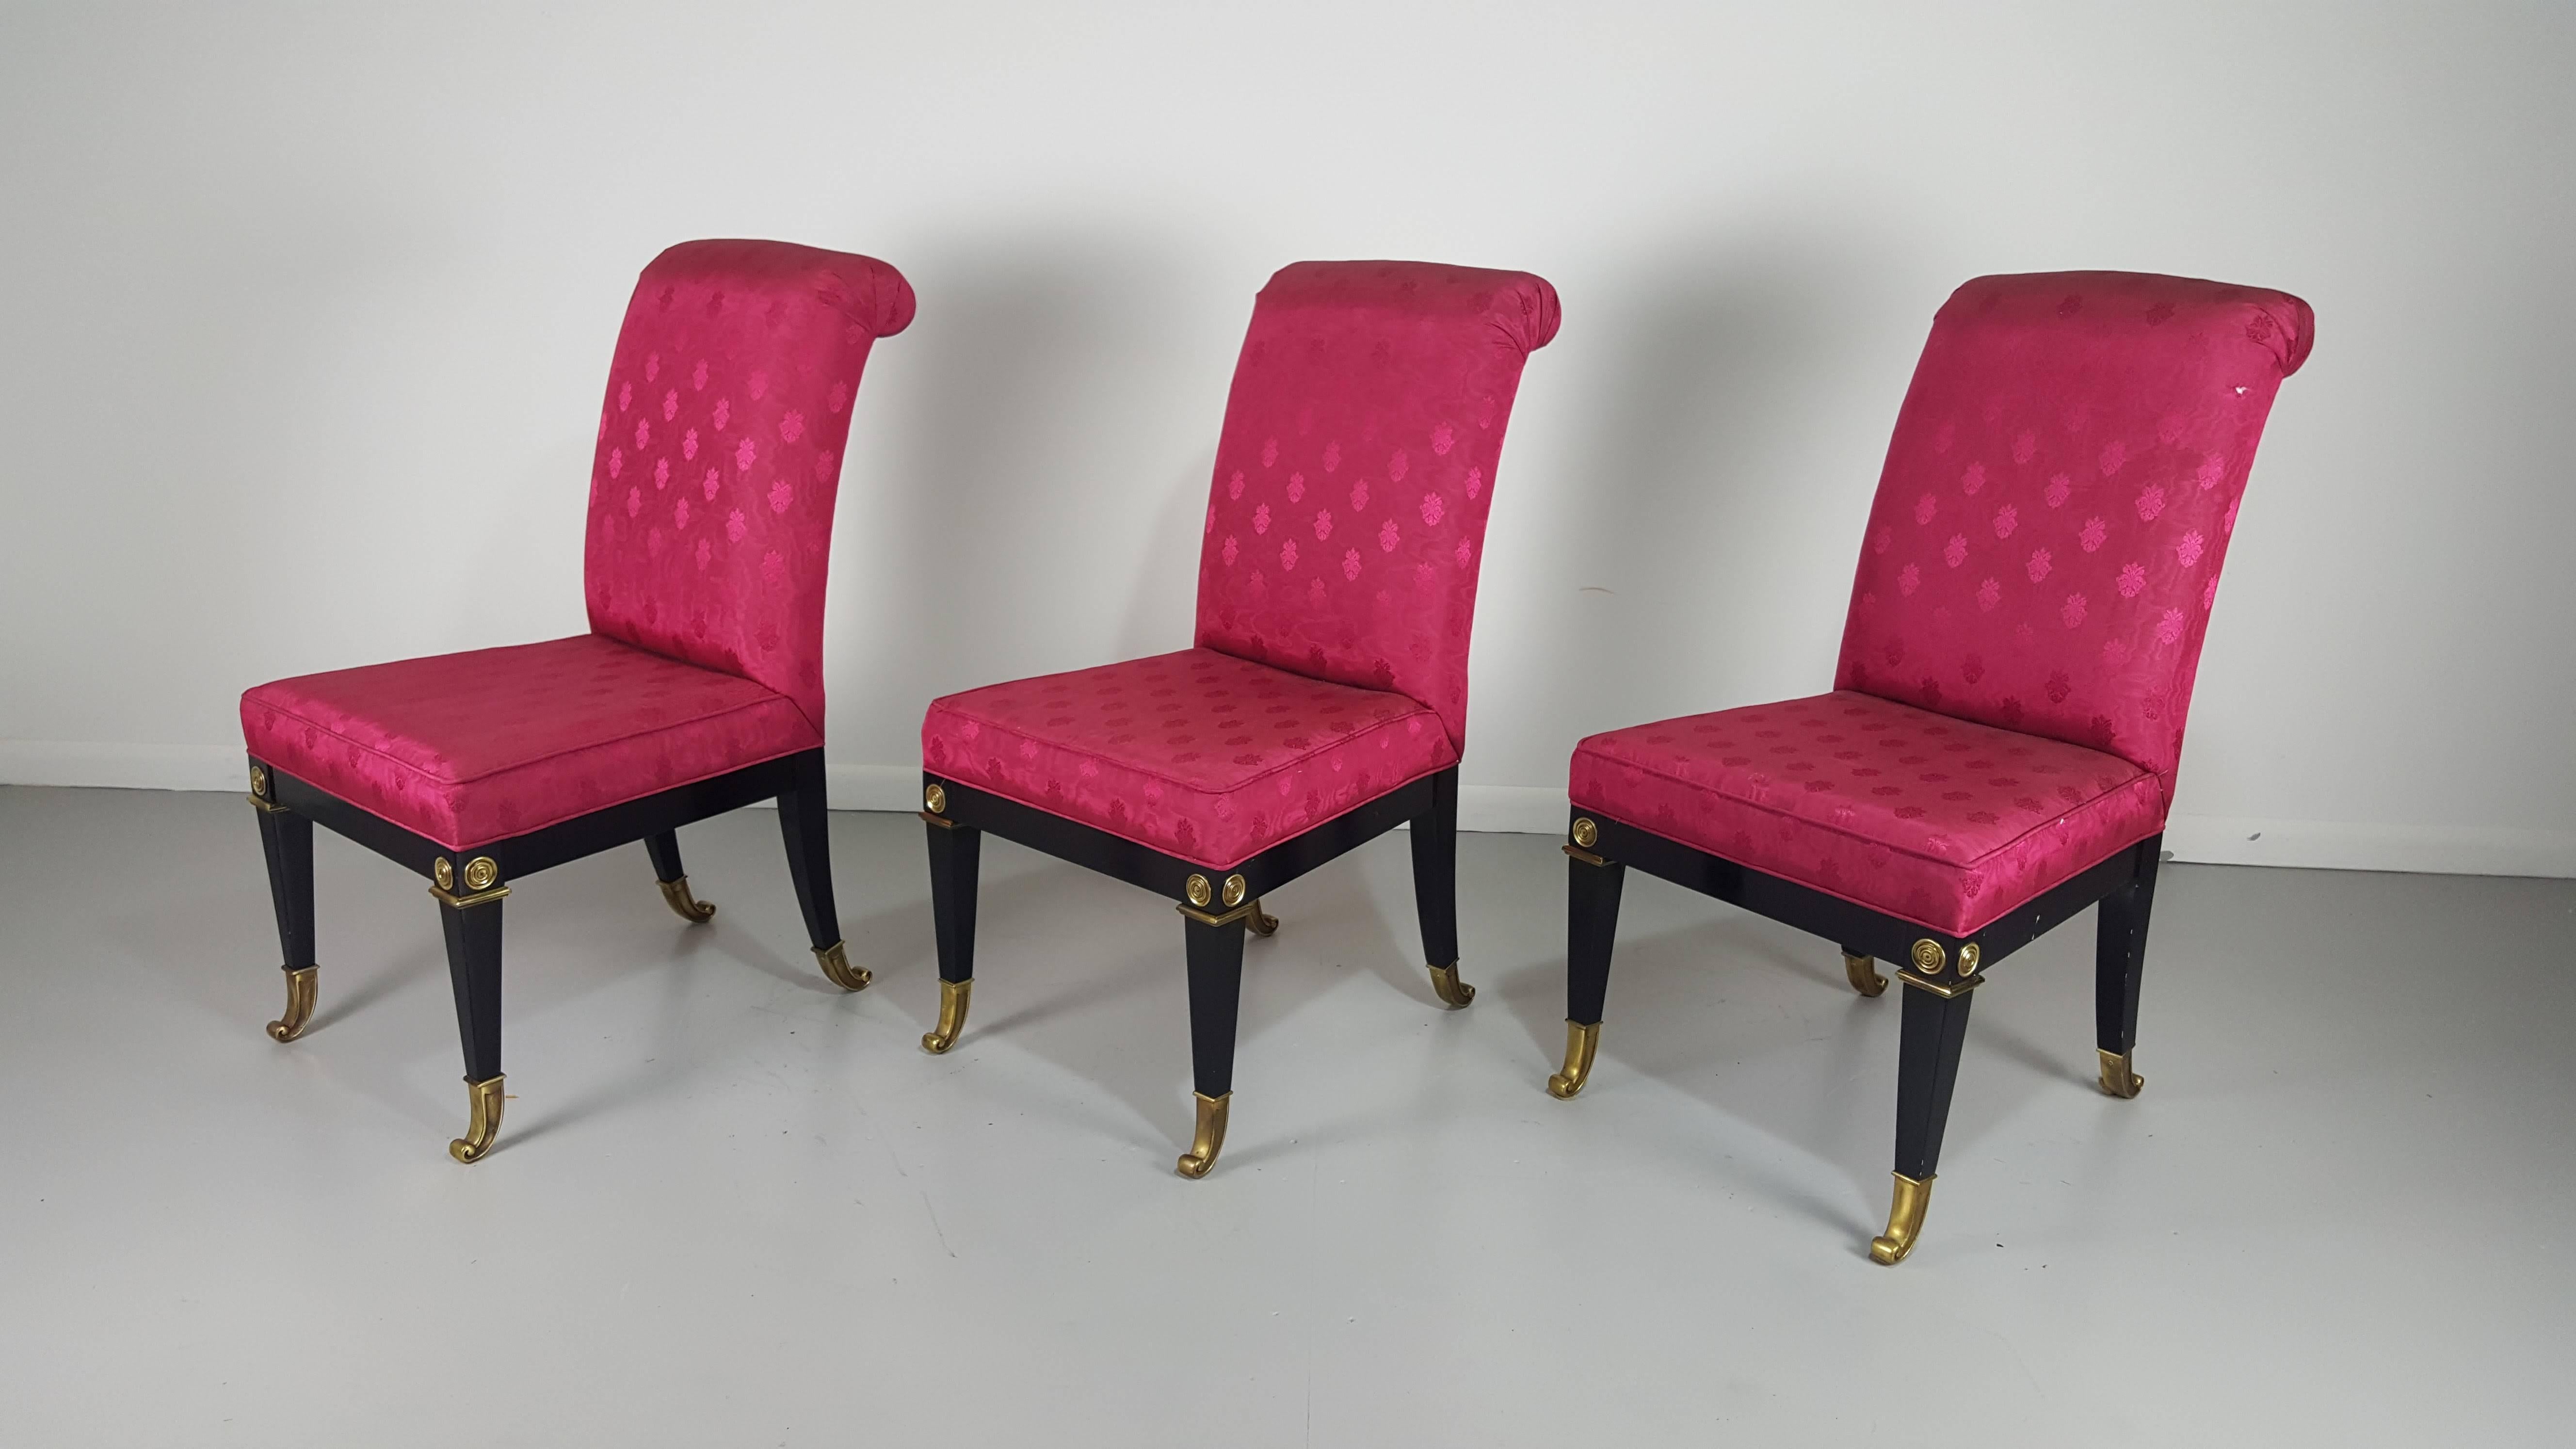 Incredible Neoclassical Lacquer and Brass Dining Chairs by Mastercraft, 1970s 2